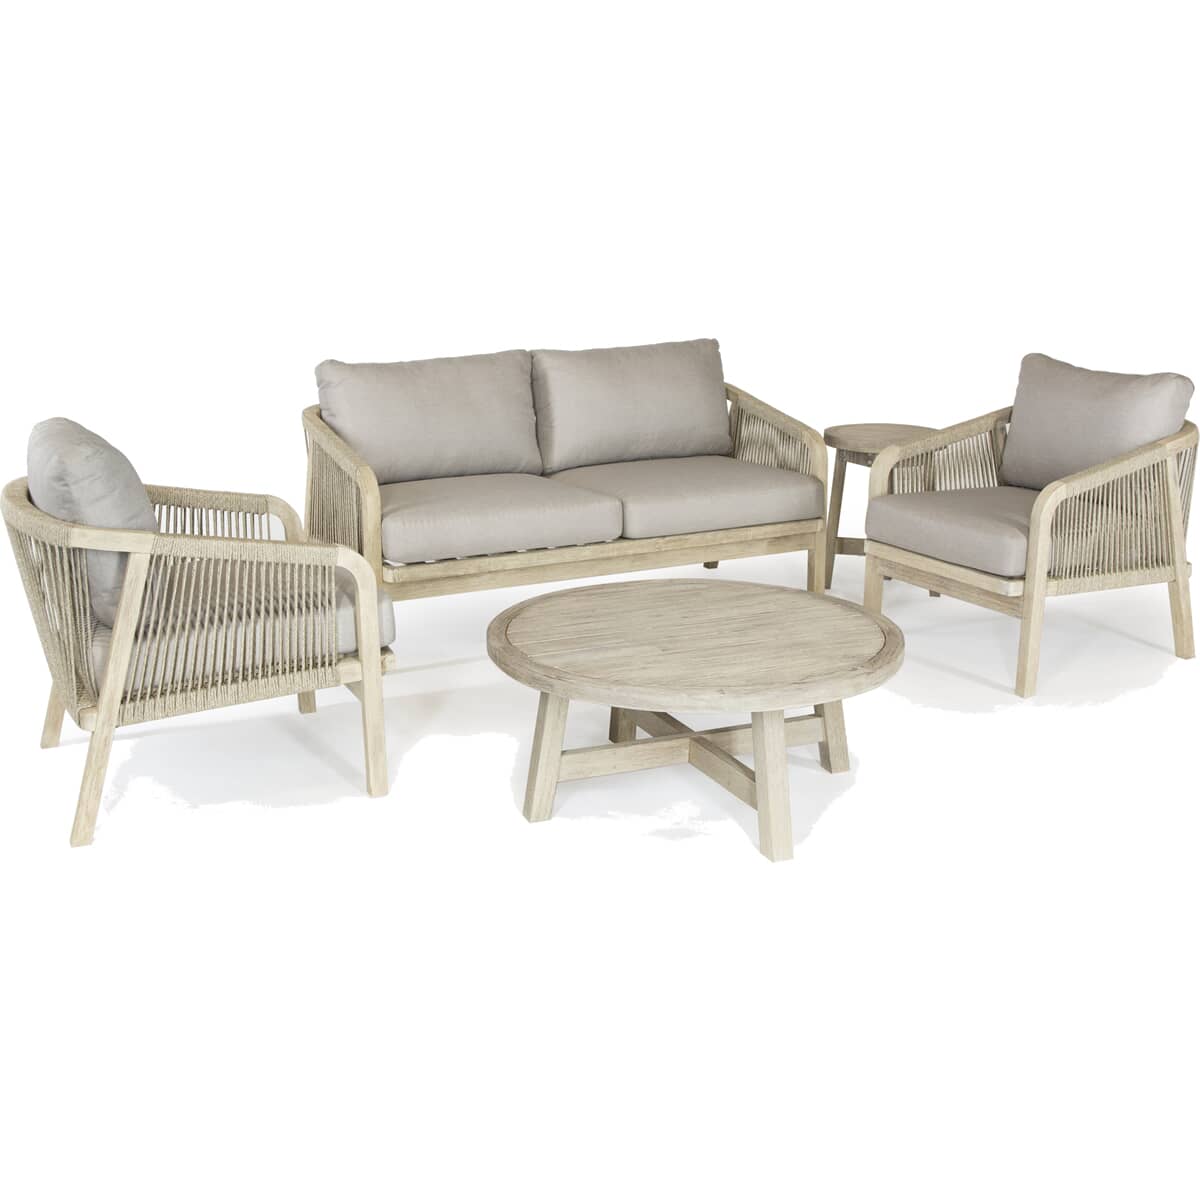 Kettler Cora Rope - 2 Seat Sofa Lounge Set with Round Coffee Table